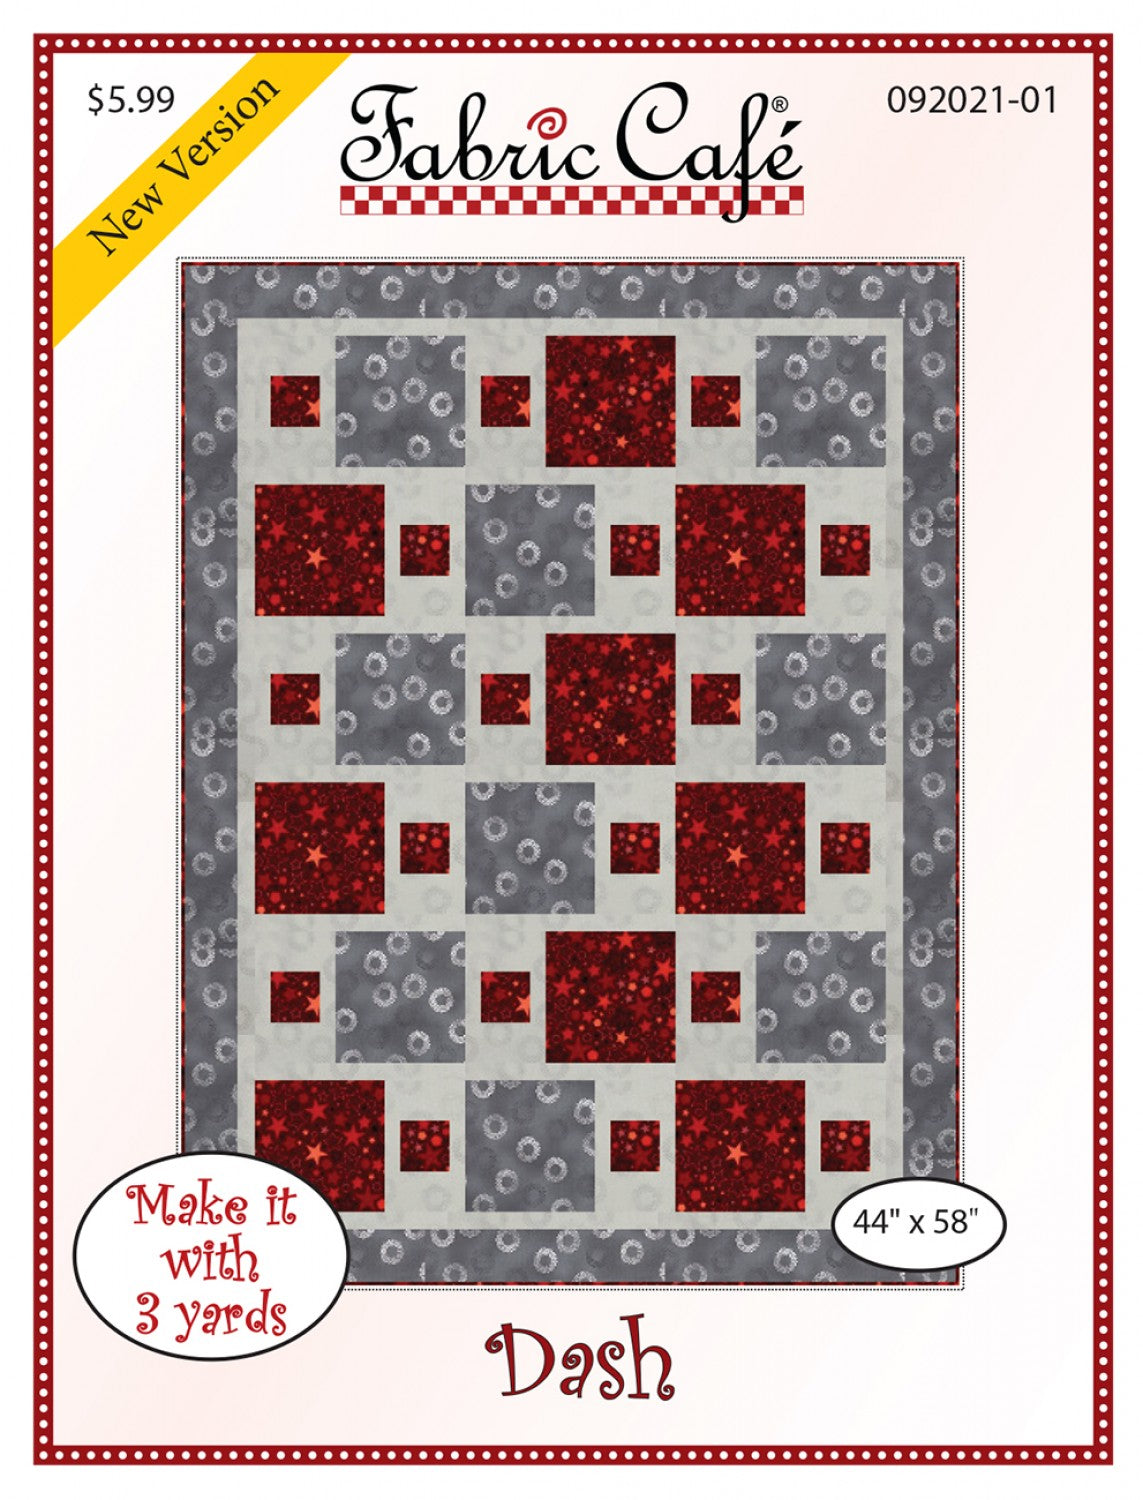 Dash - Quilt Pattern - Fabric Cafe